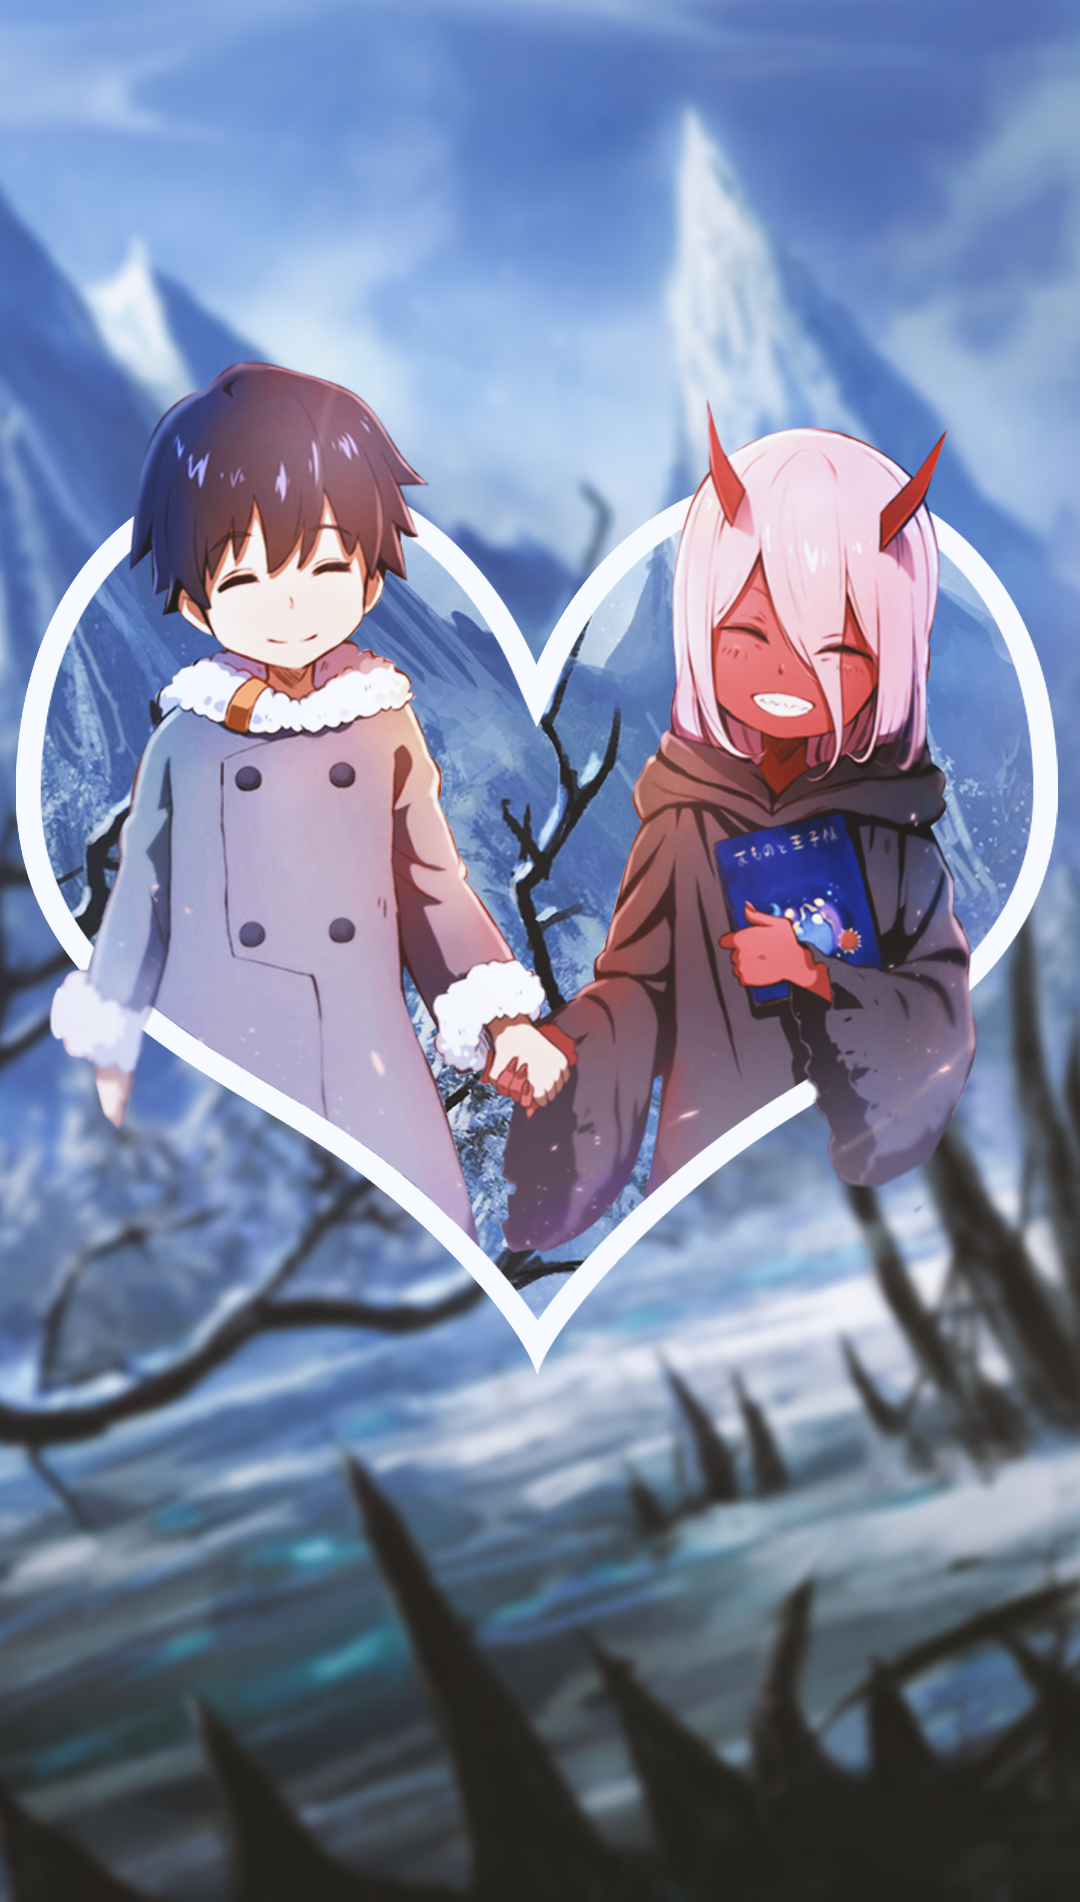 Anime 1080x1902 anime girls anime Zero Two (Darling in the FranXX) winter picture-in-picture Darling in the FranXX anime boys